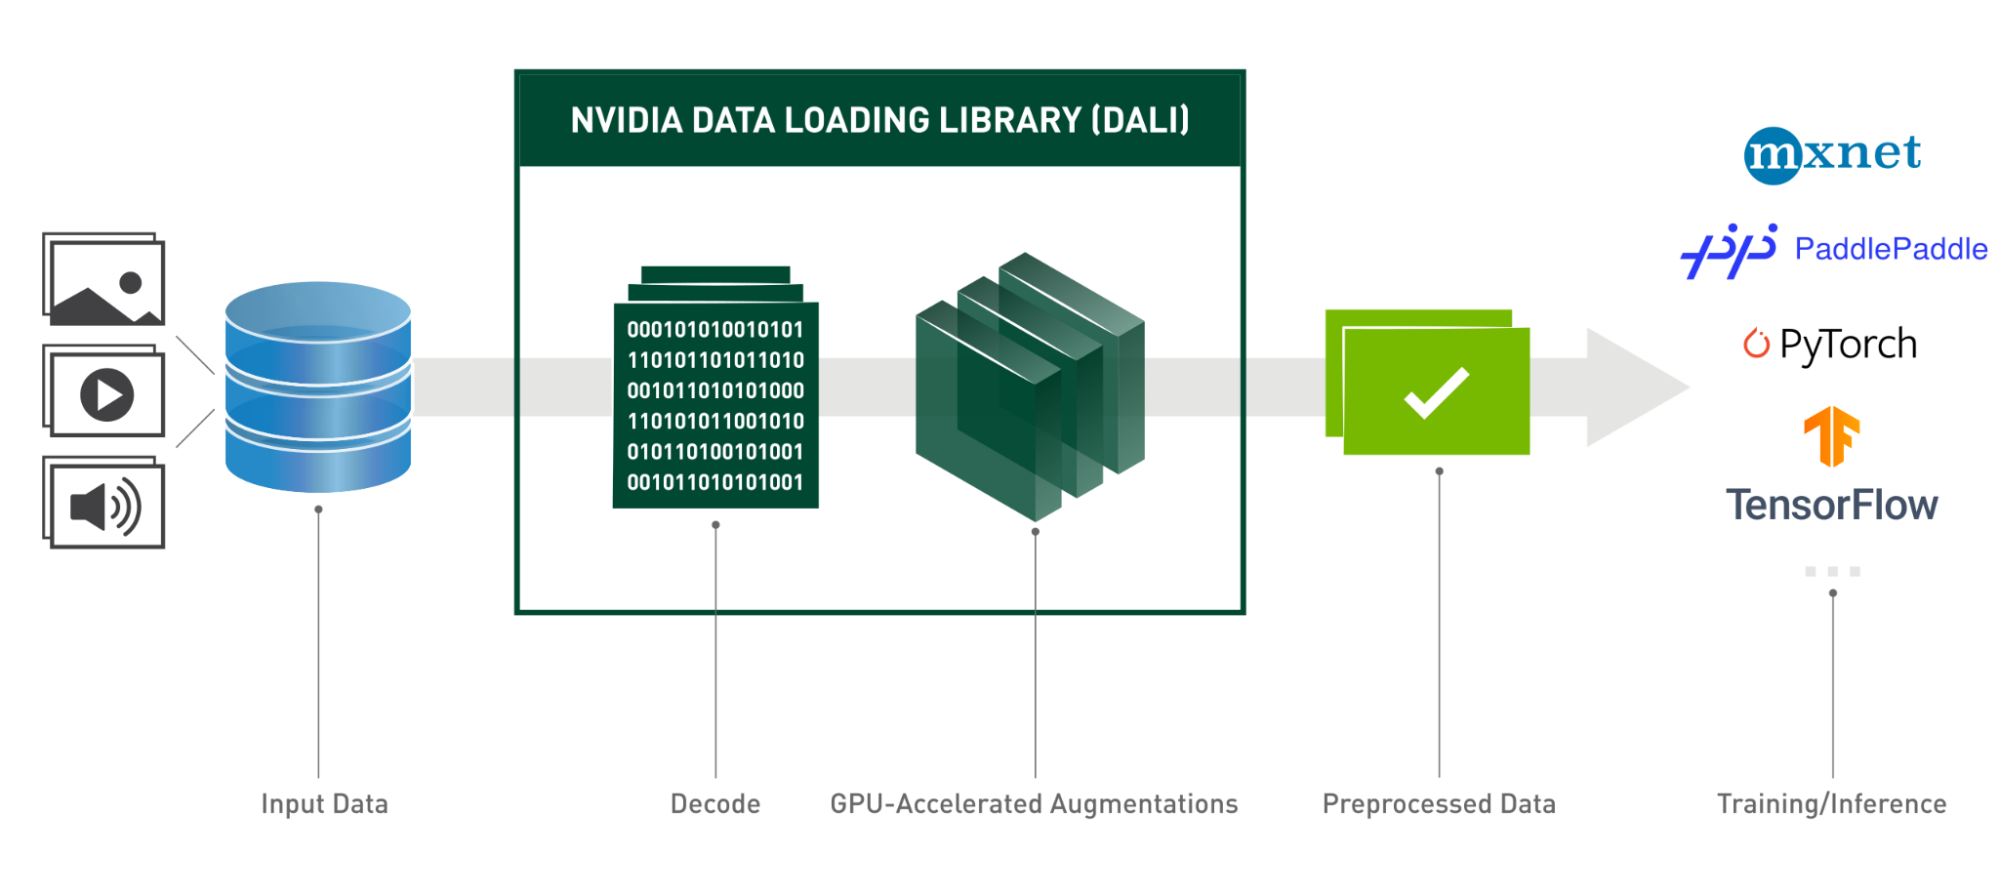 DALI Stack showing how it takes the data from the storage (image, video, or AU), uses GPU acceleration to decode and transform, and makes it ready to be used further in the training. Or for the inference process by the deep learning framework.